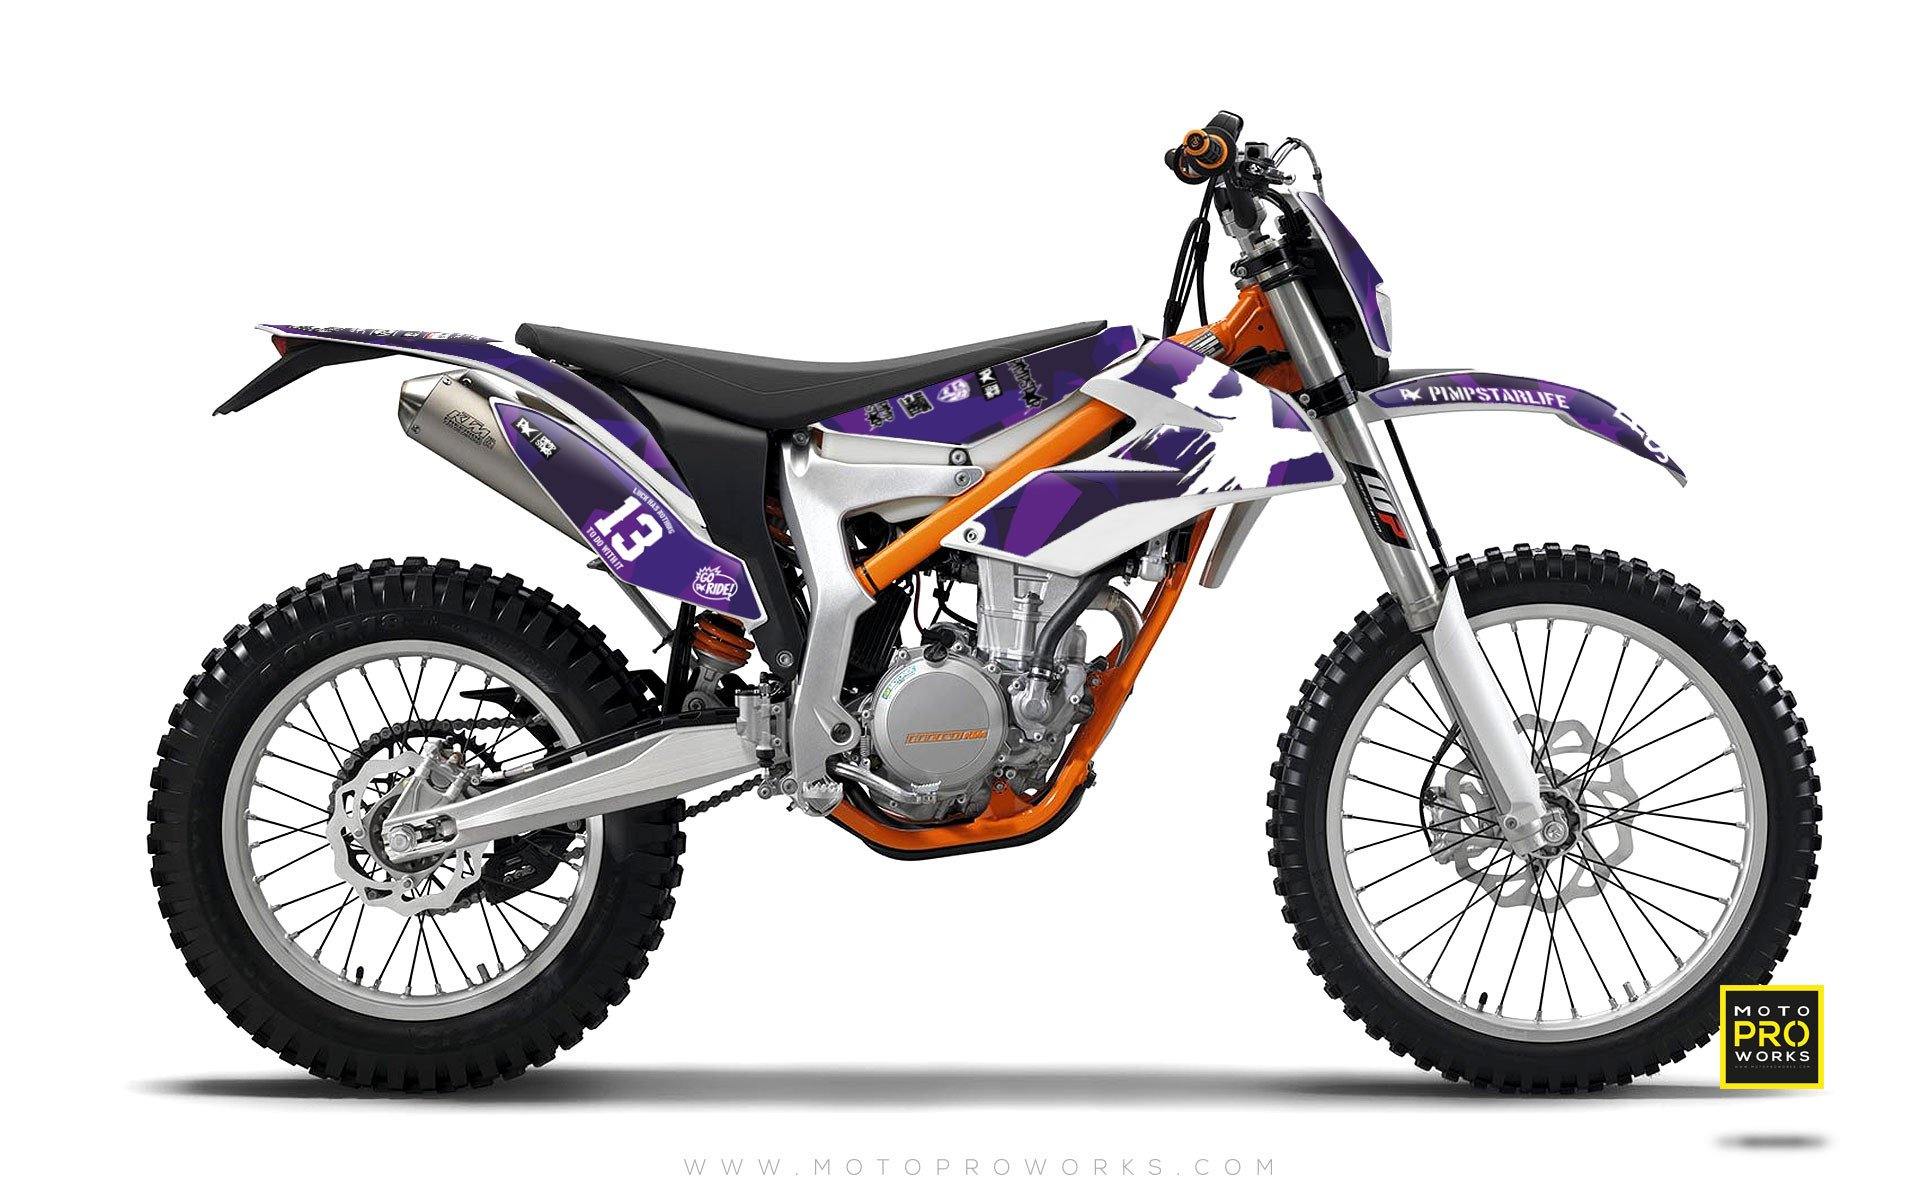 KTM GRAPHIC KIT - "M90" (purple) - MotoProWorks | Decals and Bike Graphic kit